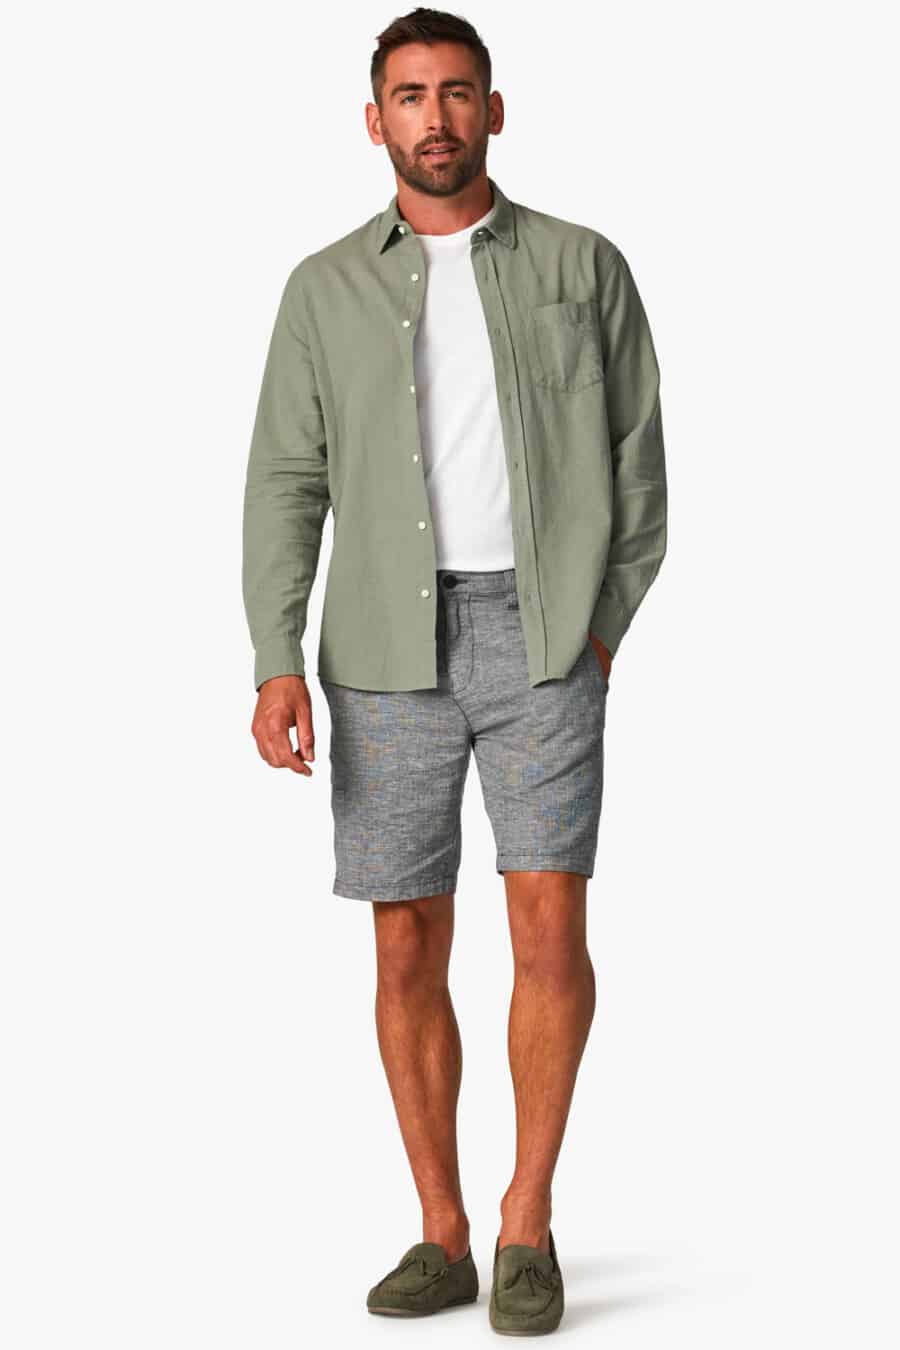 Men's grey shorts, white T-shirt, green open shirt and suede green driving shoes outfit